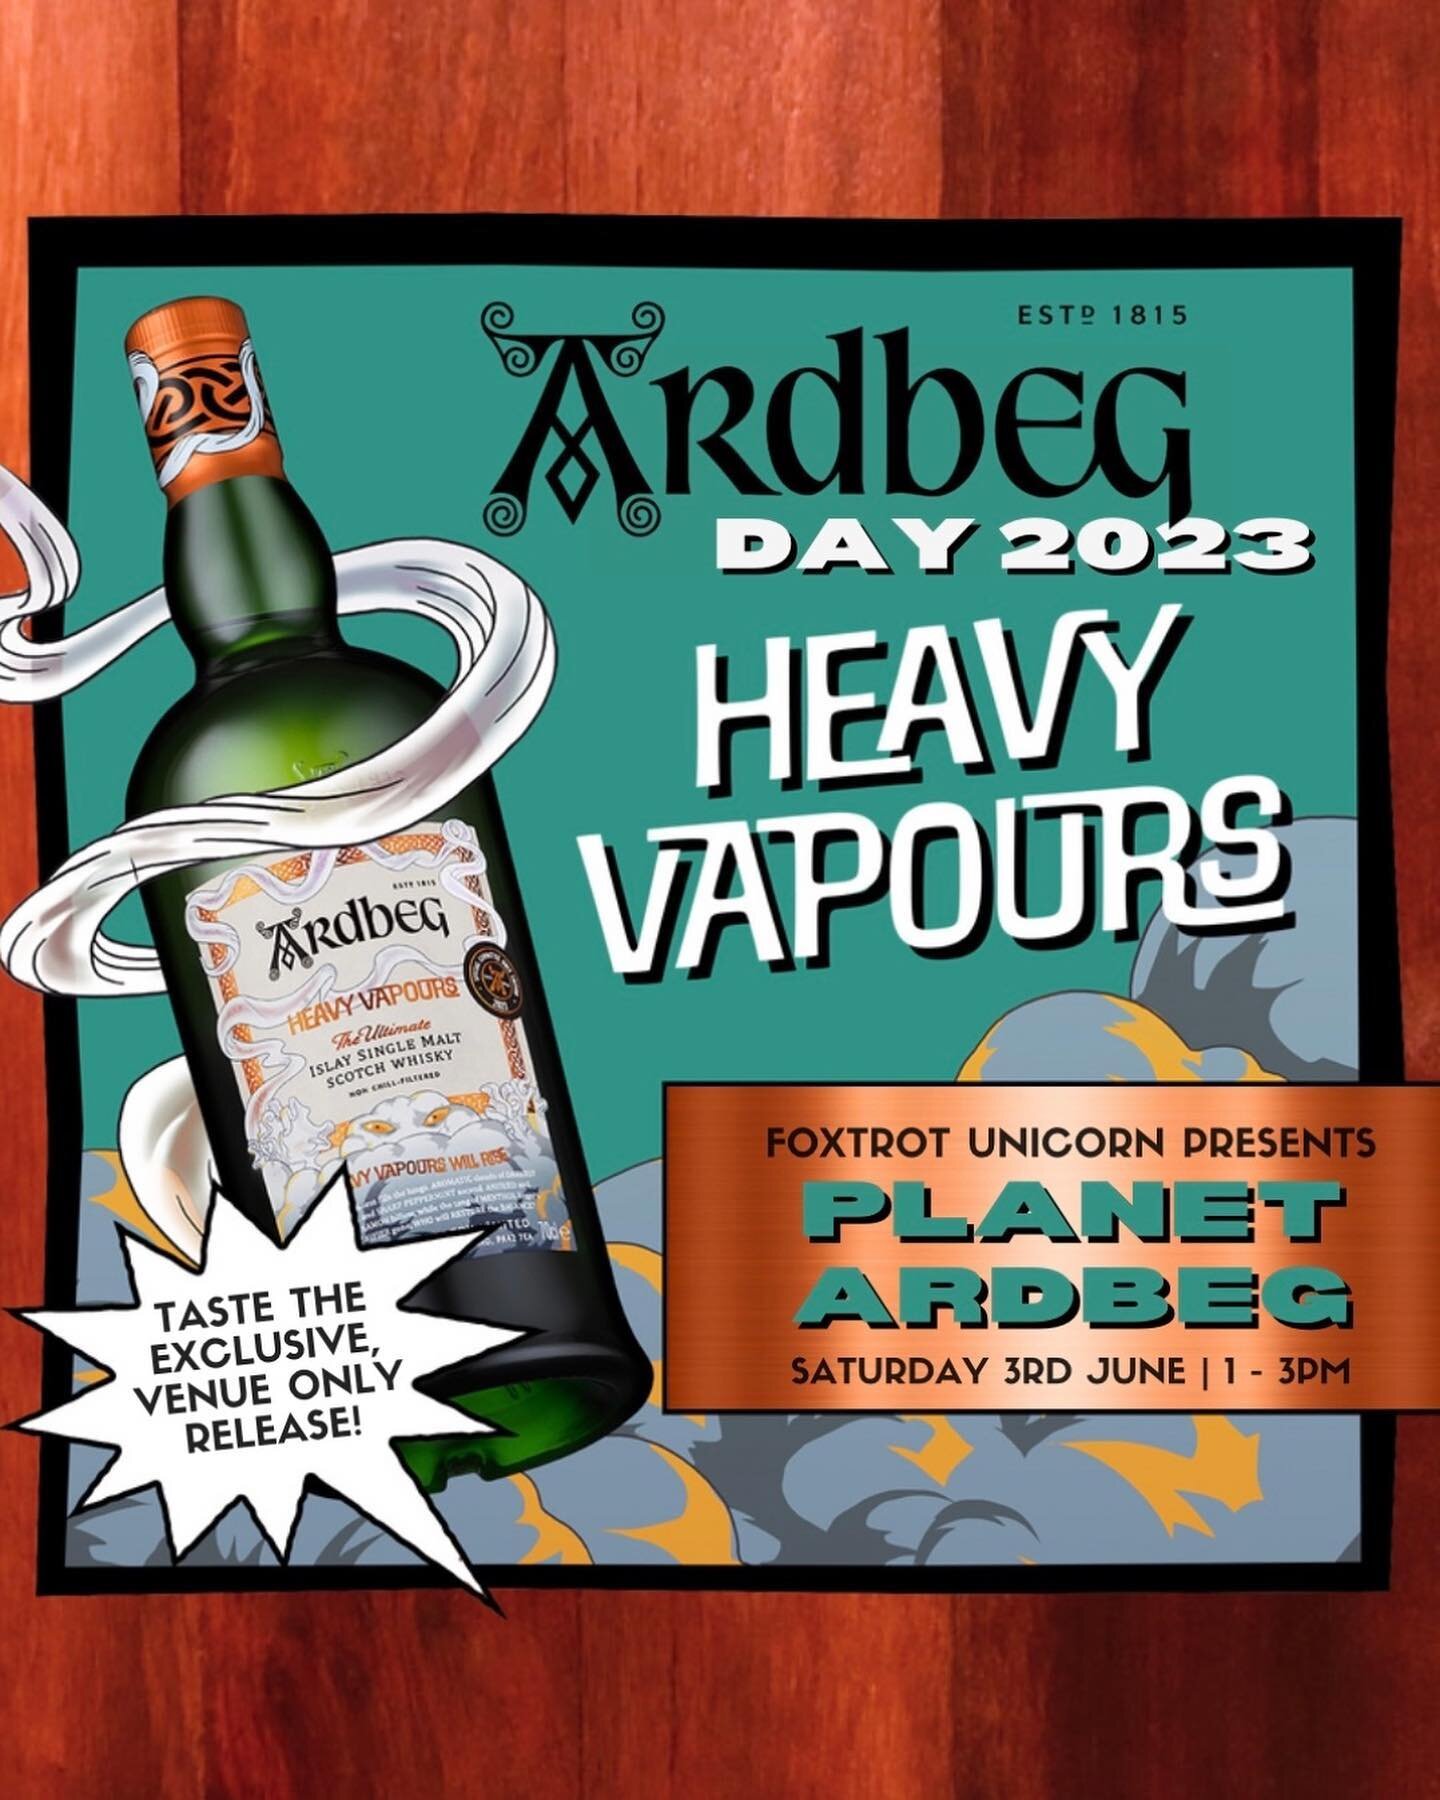 Ardbeg Day 2023 is upon us, so join us at Foxtrot Unicorn - Perth's official Ardbeg Embassy on Saturday 3 June for a taste of this year's exclusive releases!

Get ready to smoke bomb your taste buds as we head to PLANET ARDBEG and explore one of thei